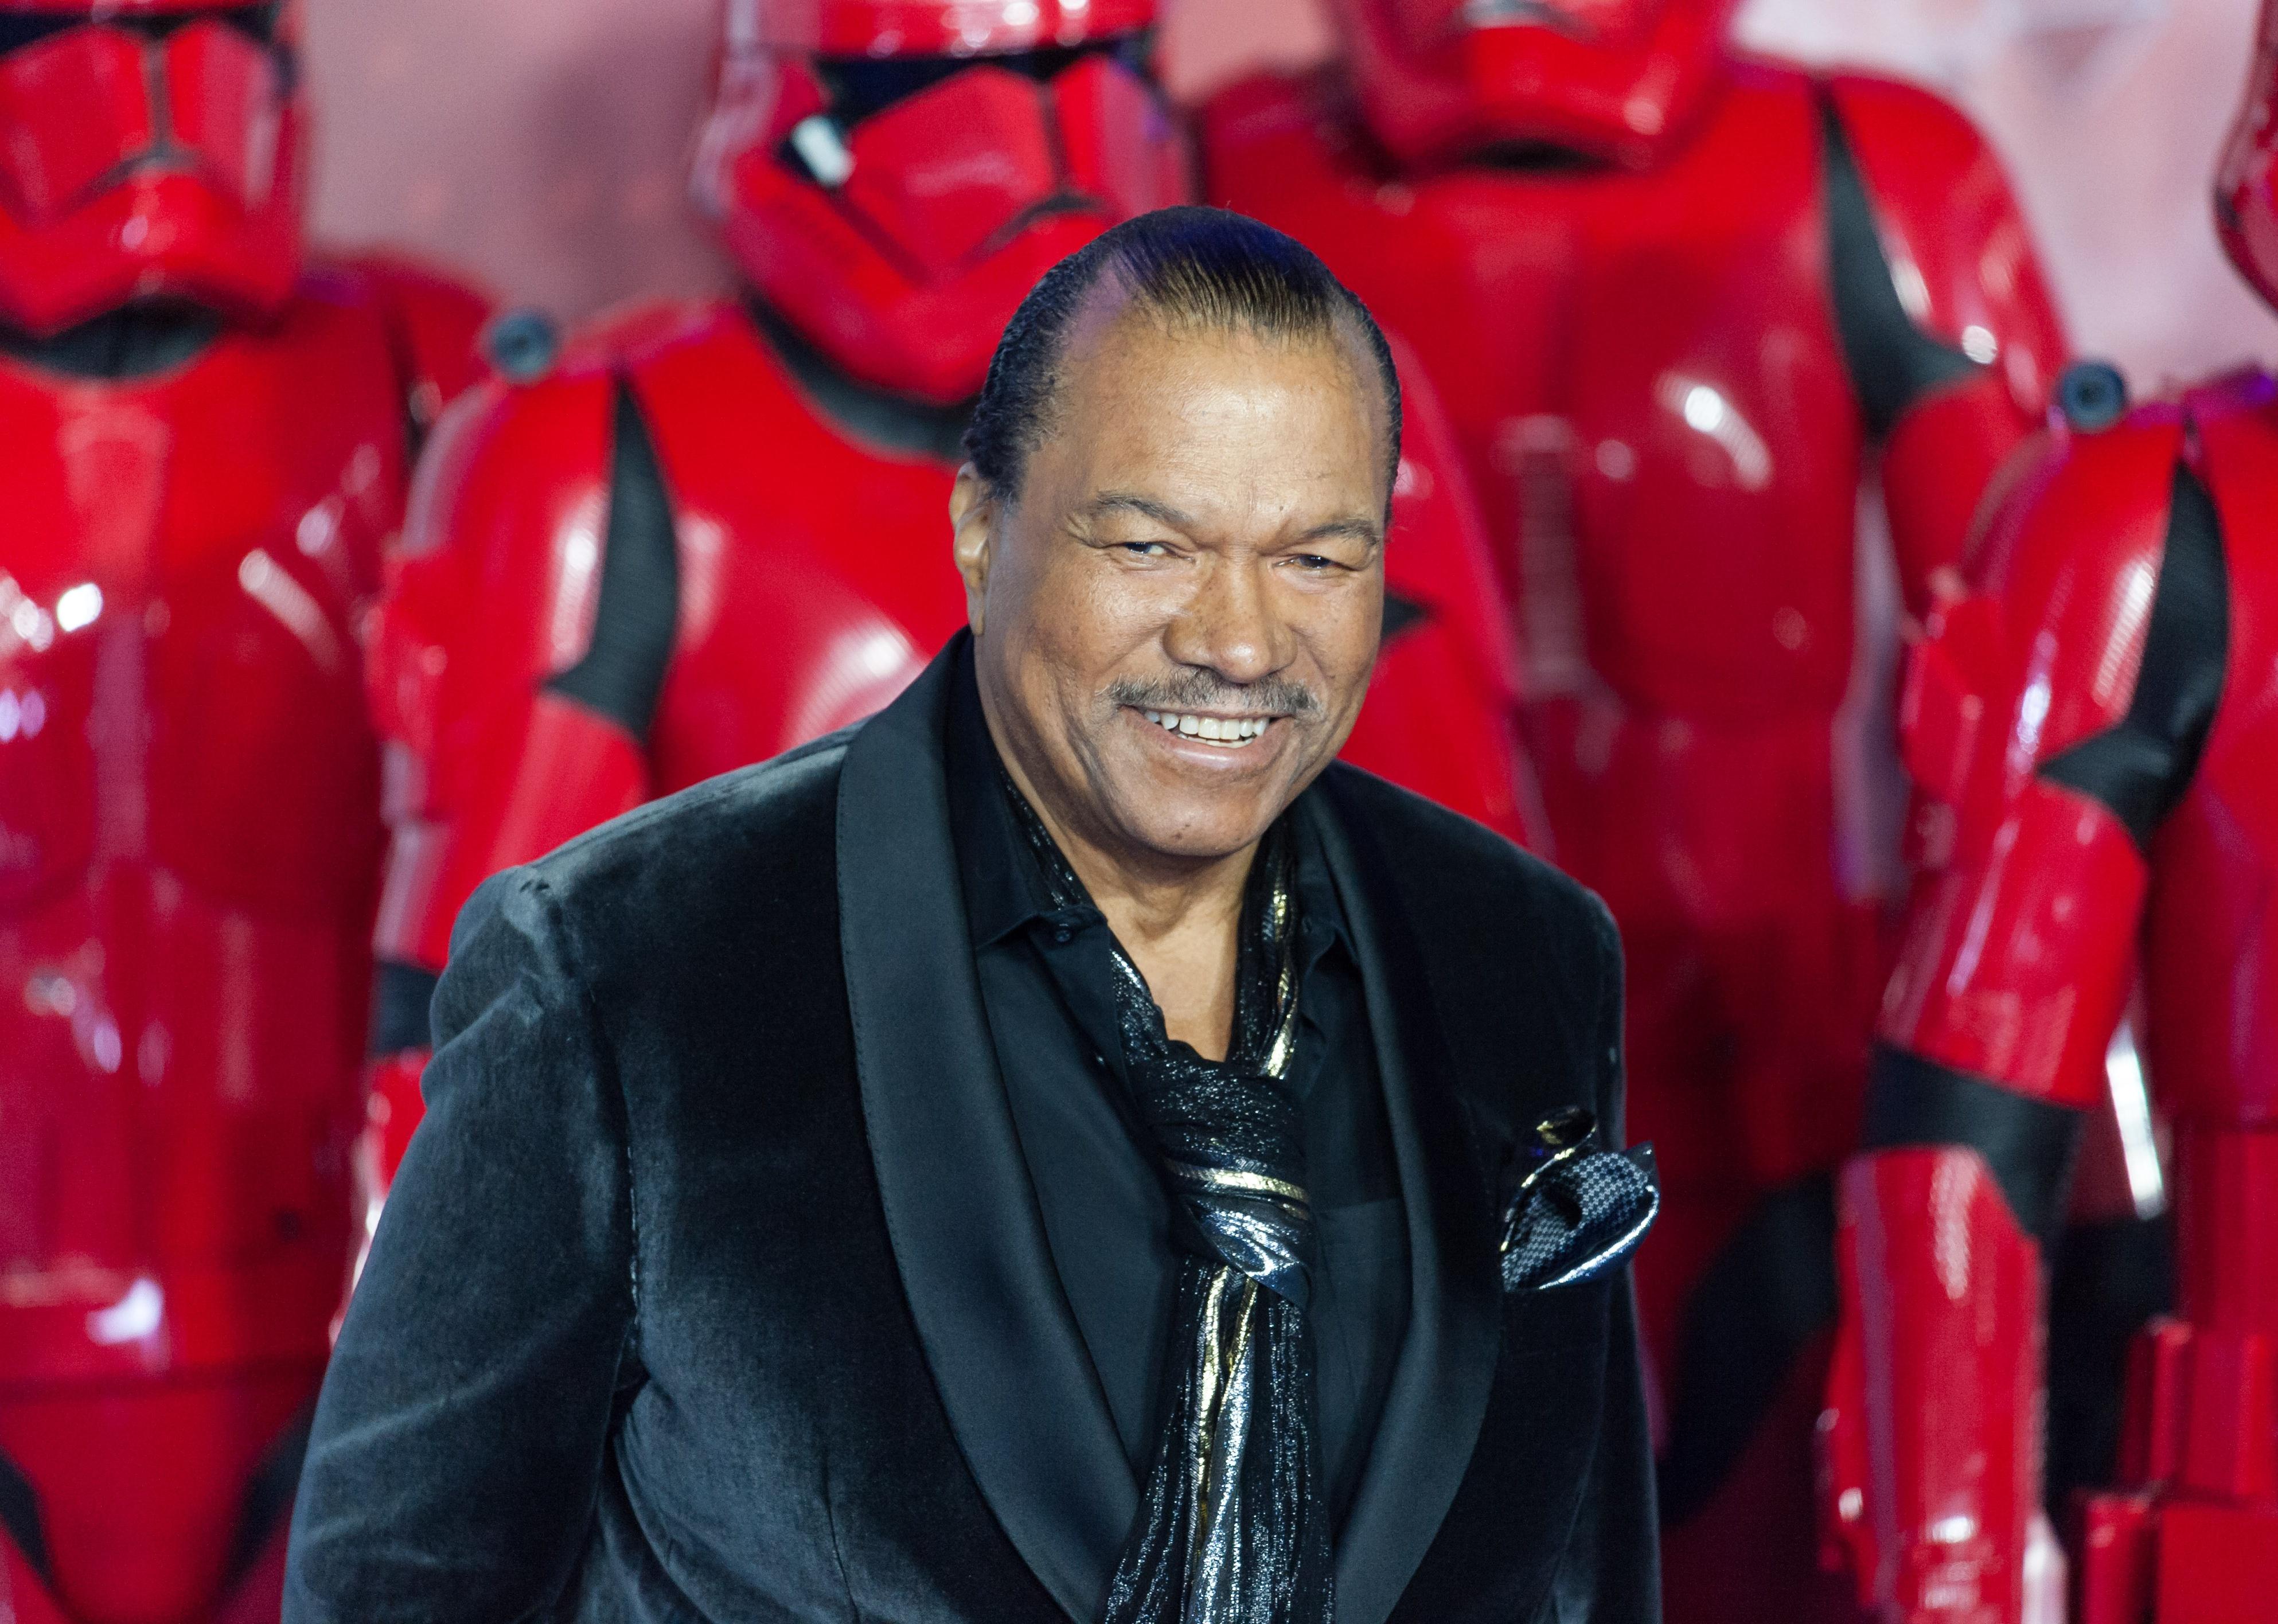 Billy Dee Williams on stage in a black velvet suit and scarf in front of red Star Wars suits.